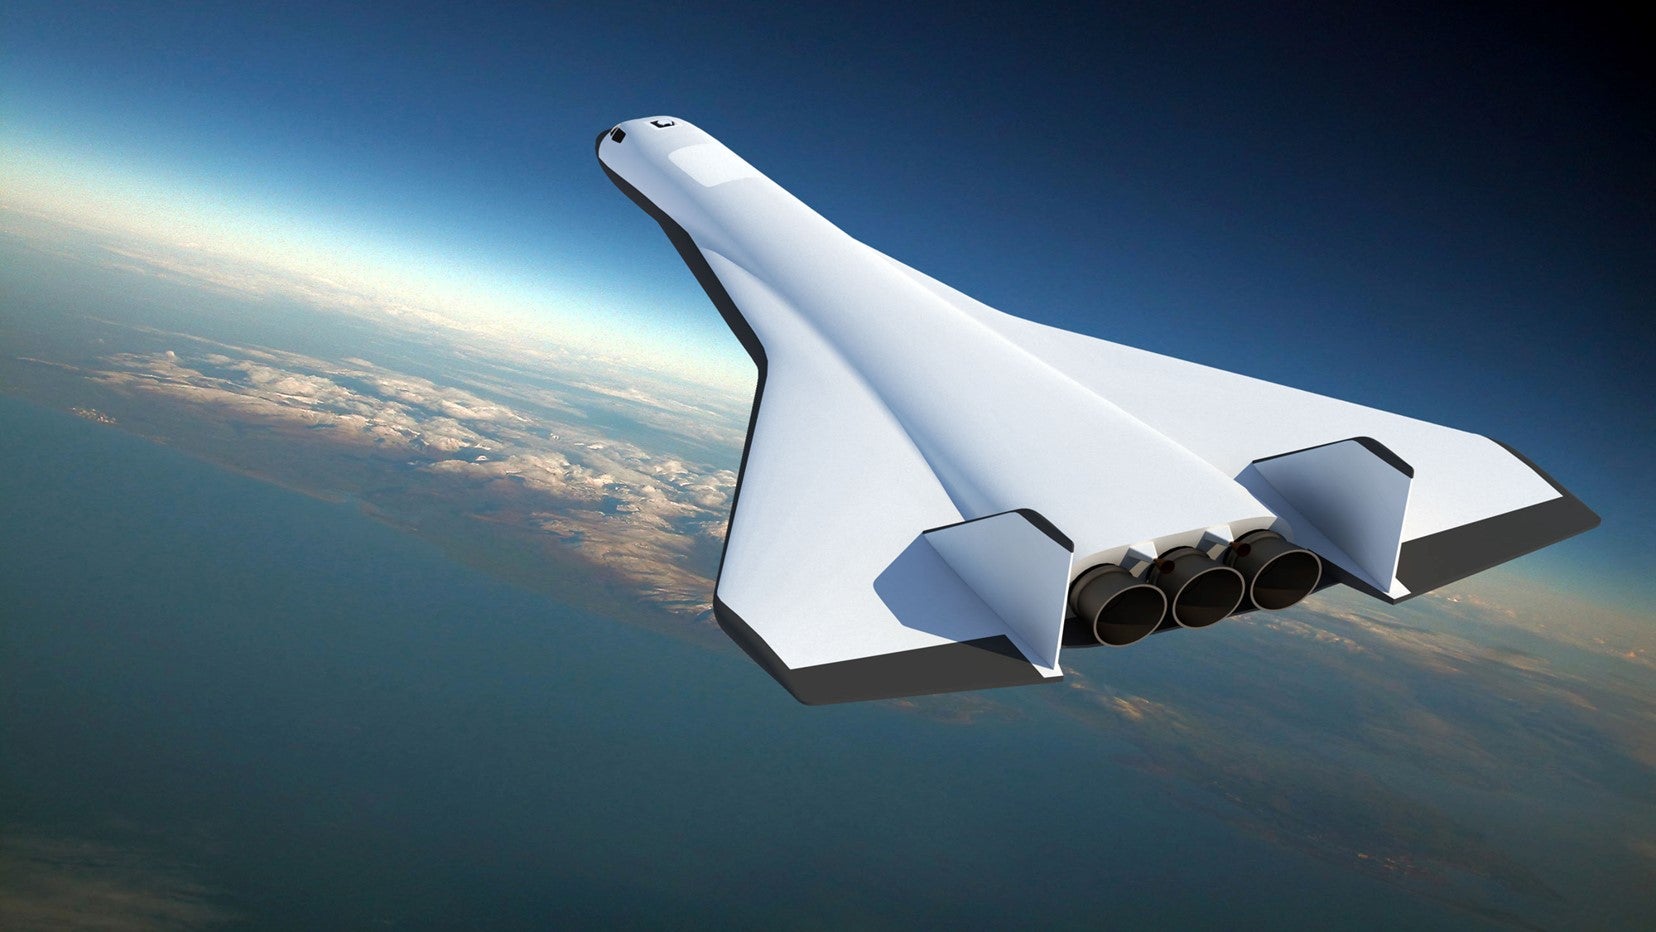 Radian Aerospace Wants to Build ‘Holy Grail’ Spaceplane